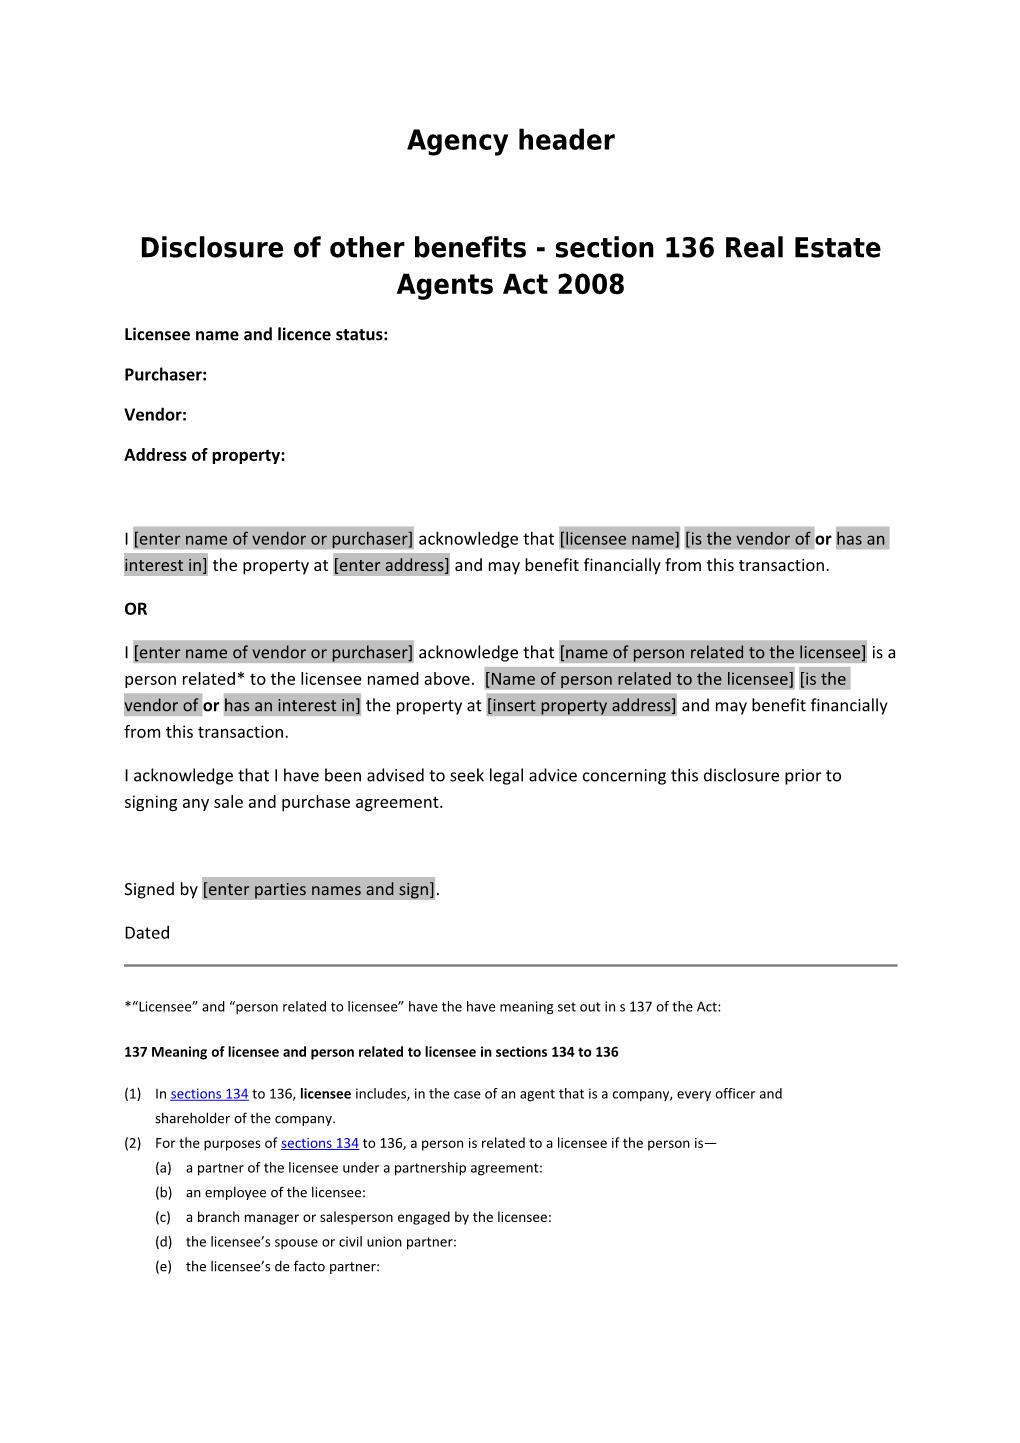 Disclosure of Other Benefits - Section 136 Real Estate Agents Act 2008